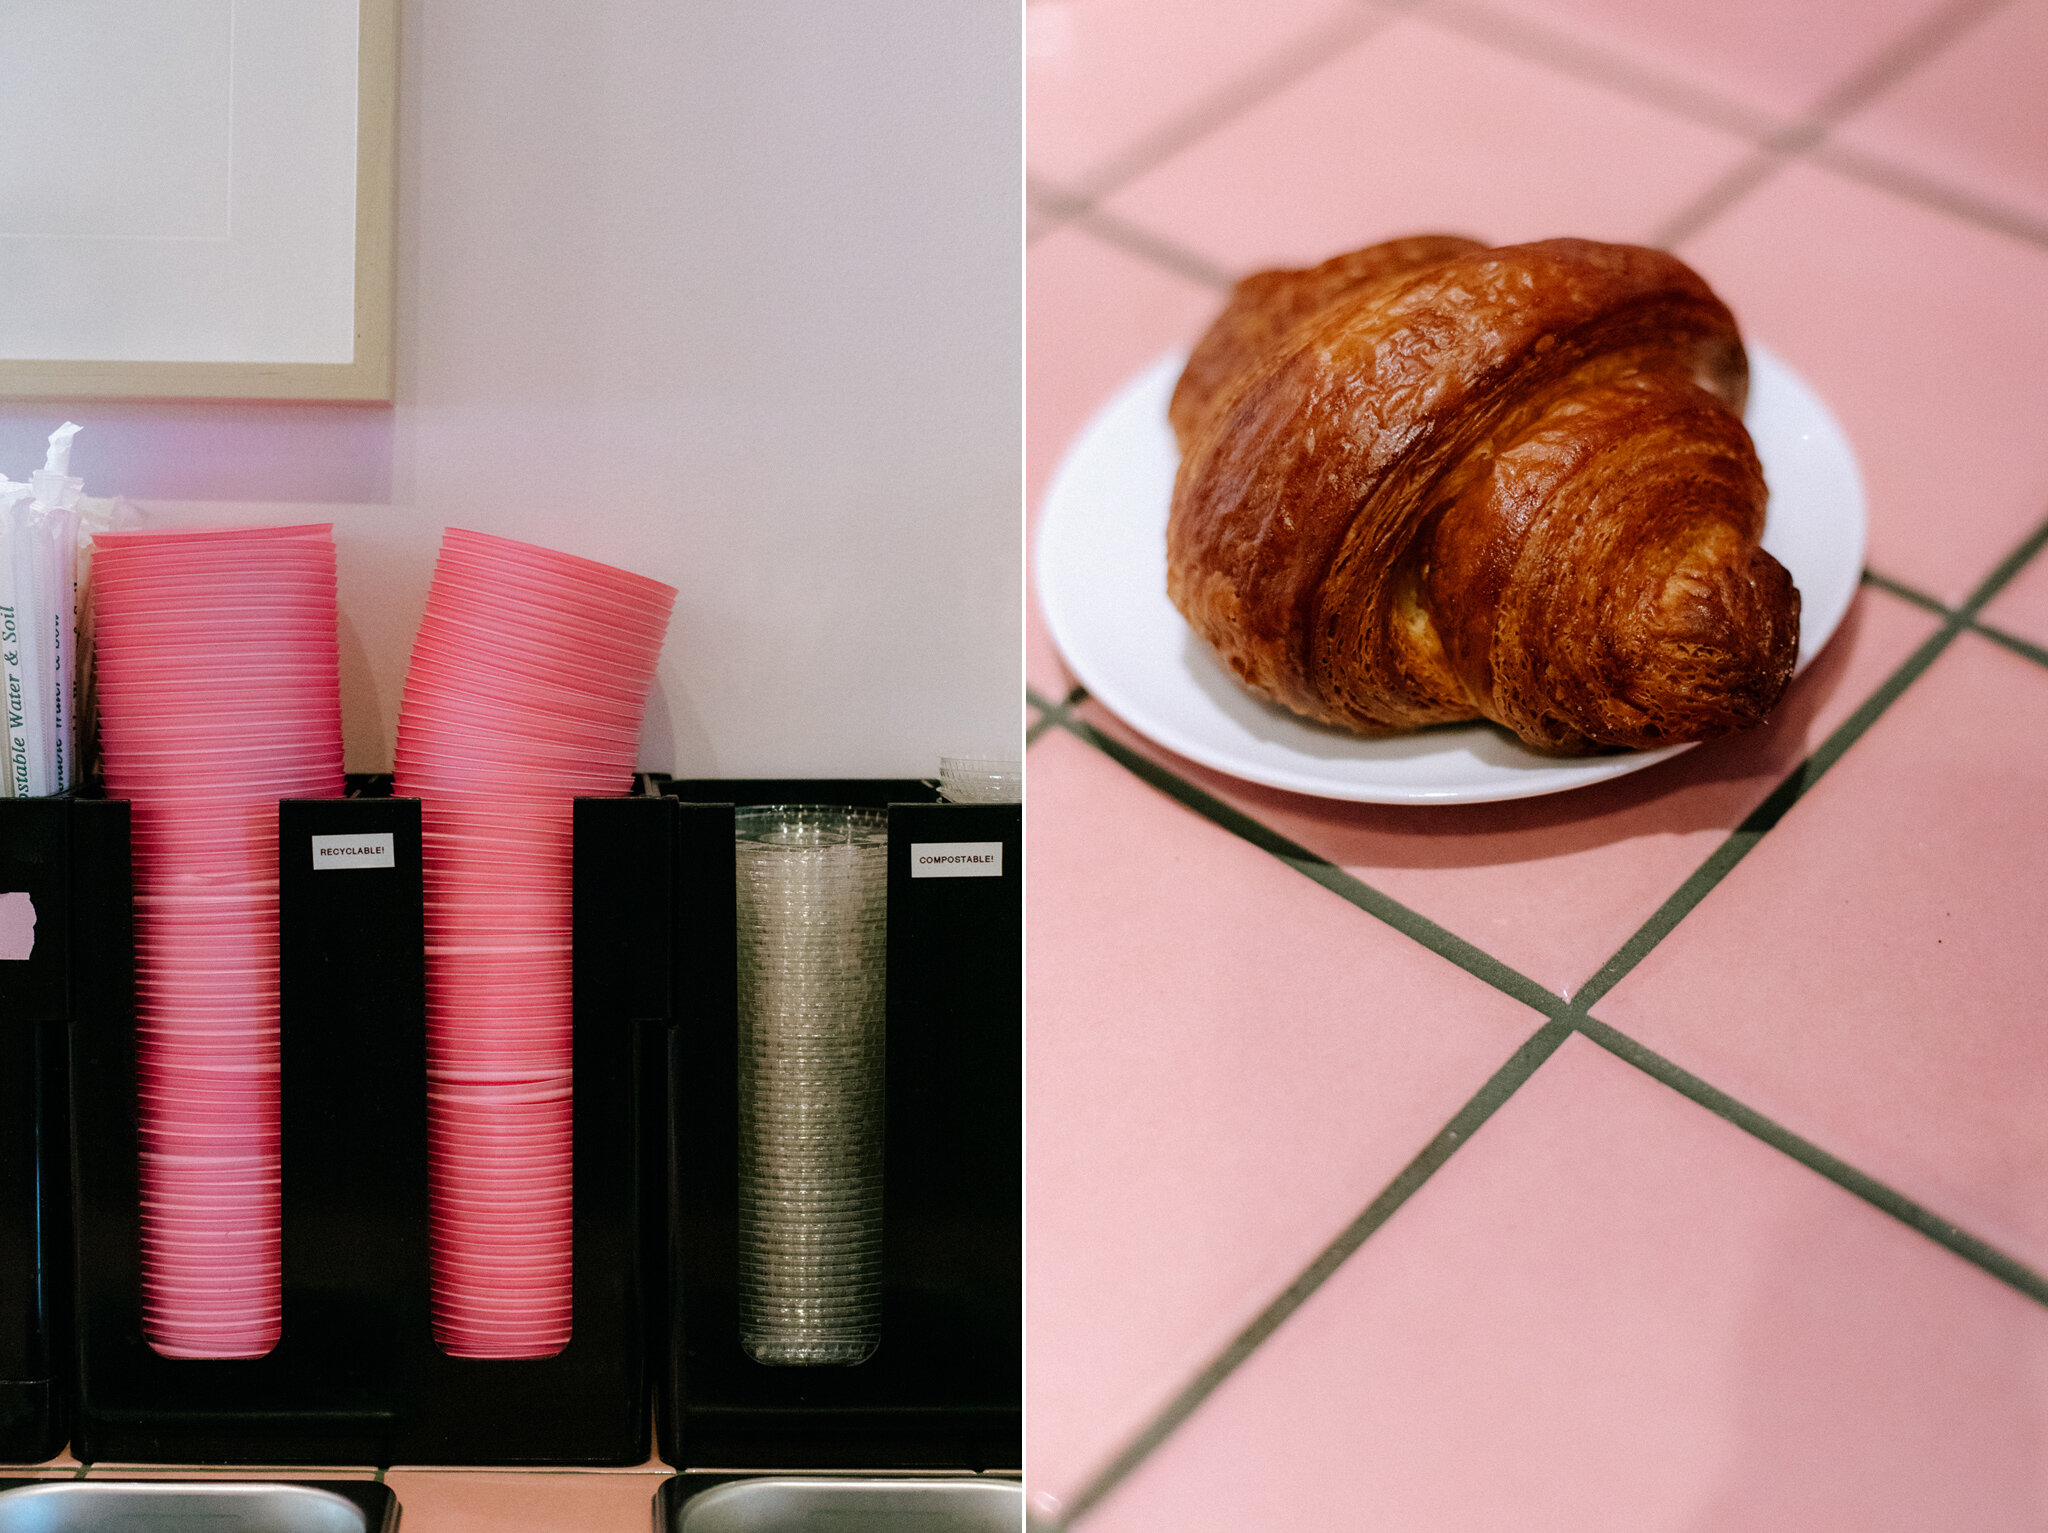 Good Grief custom pink lids and croissant